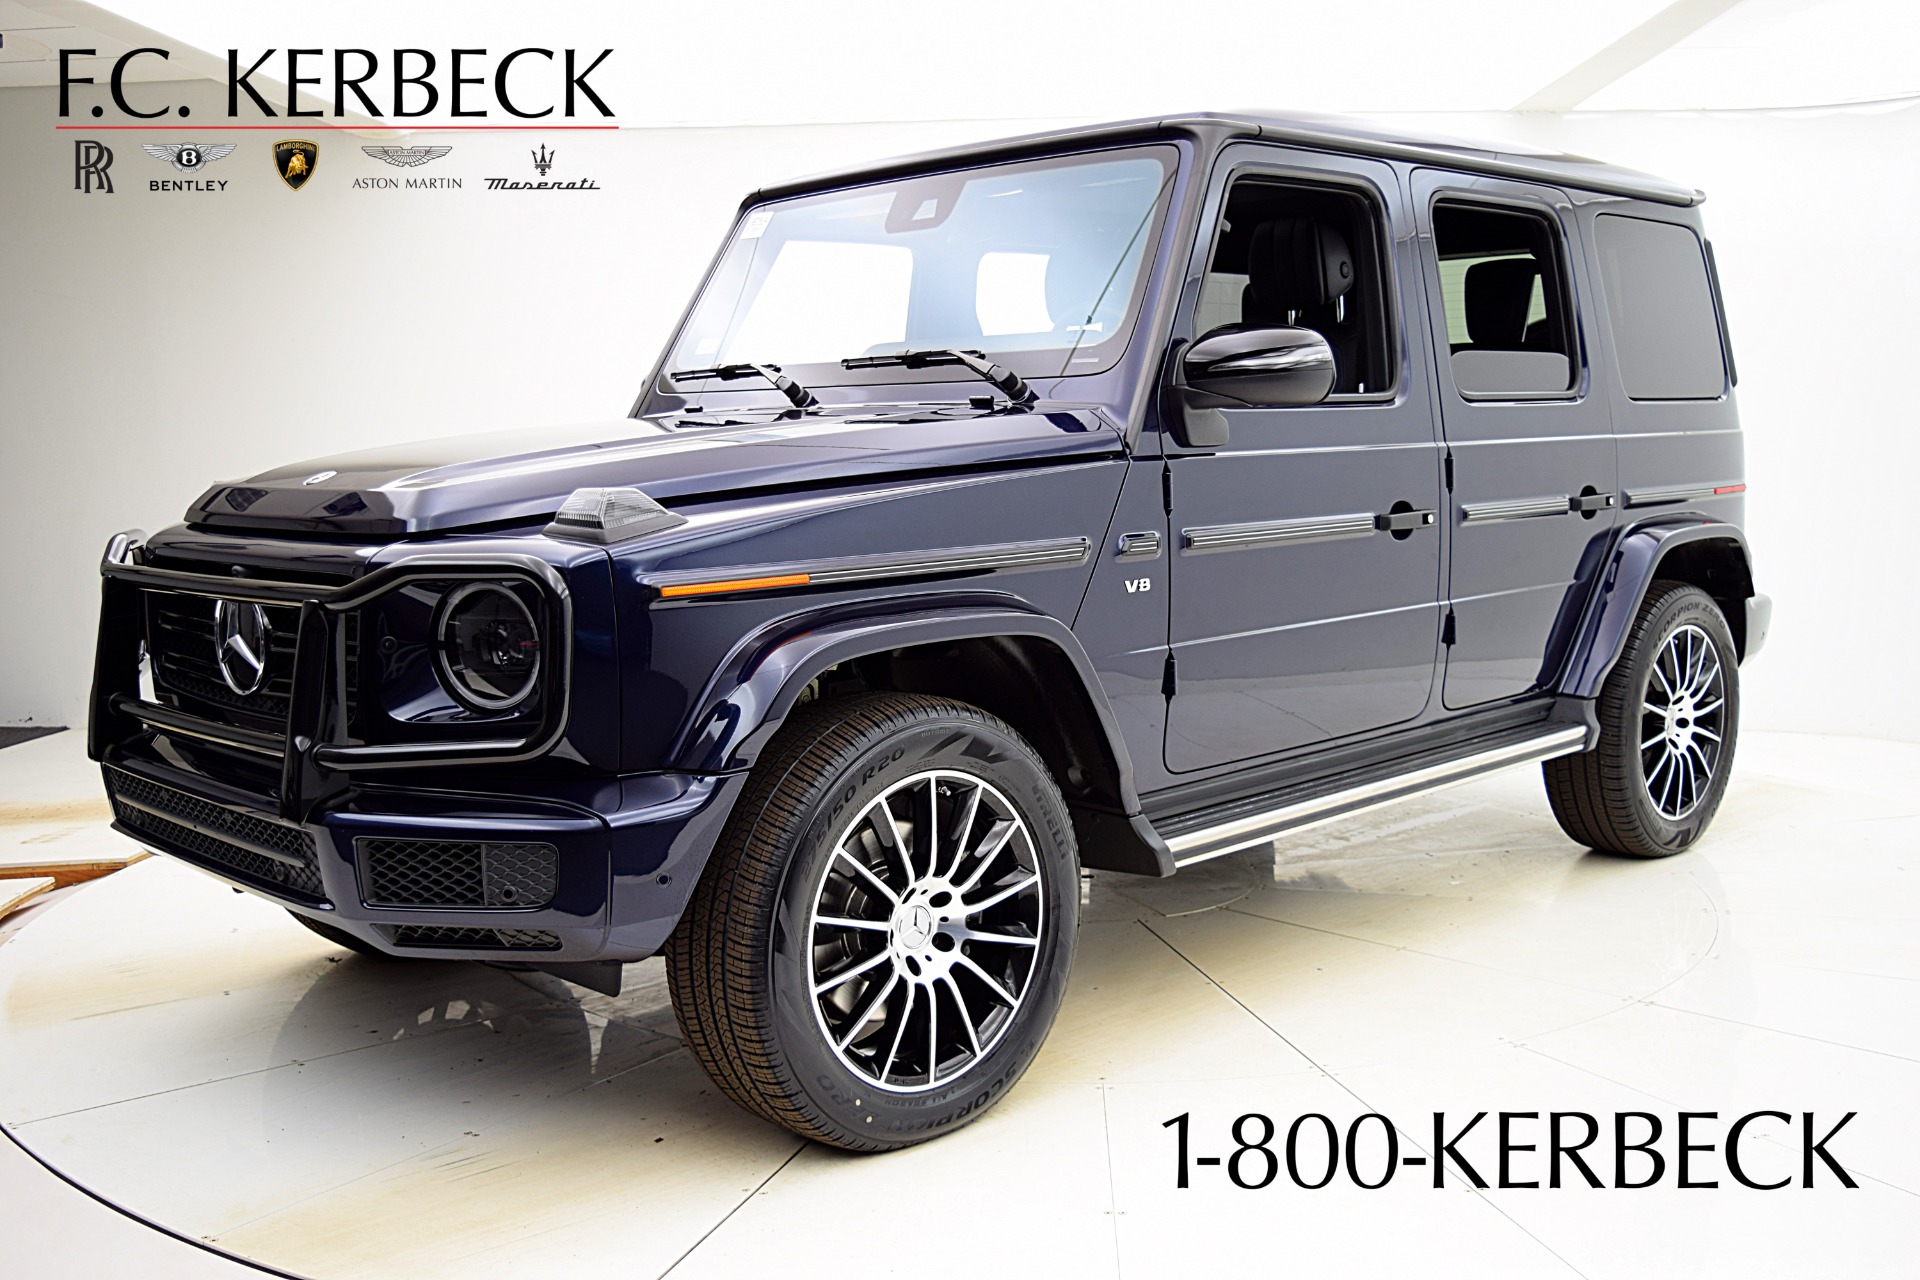 Used 2020 Mercedes-Benz G-Class G 550 for sale $139,000 at Bentley Palmyra N.J. in Palmyra NJ 08065 2